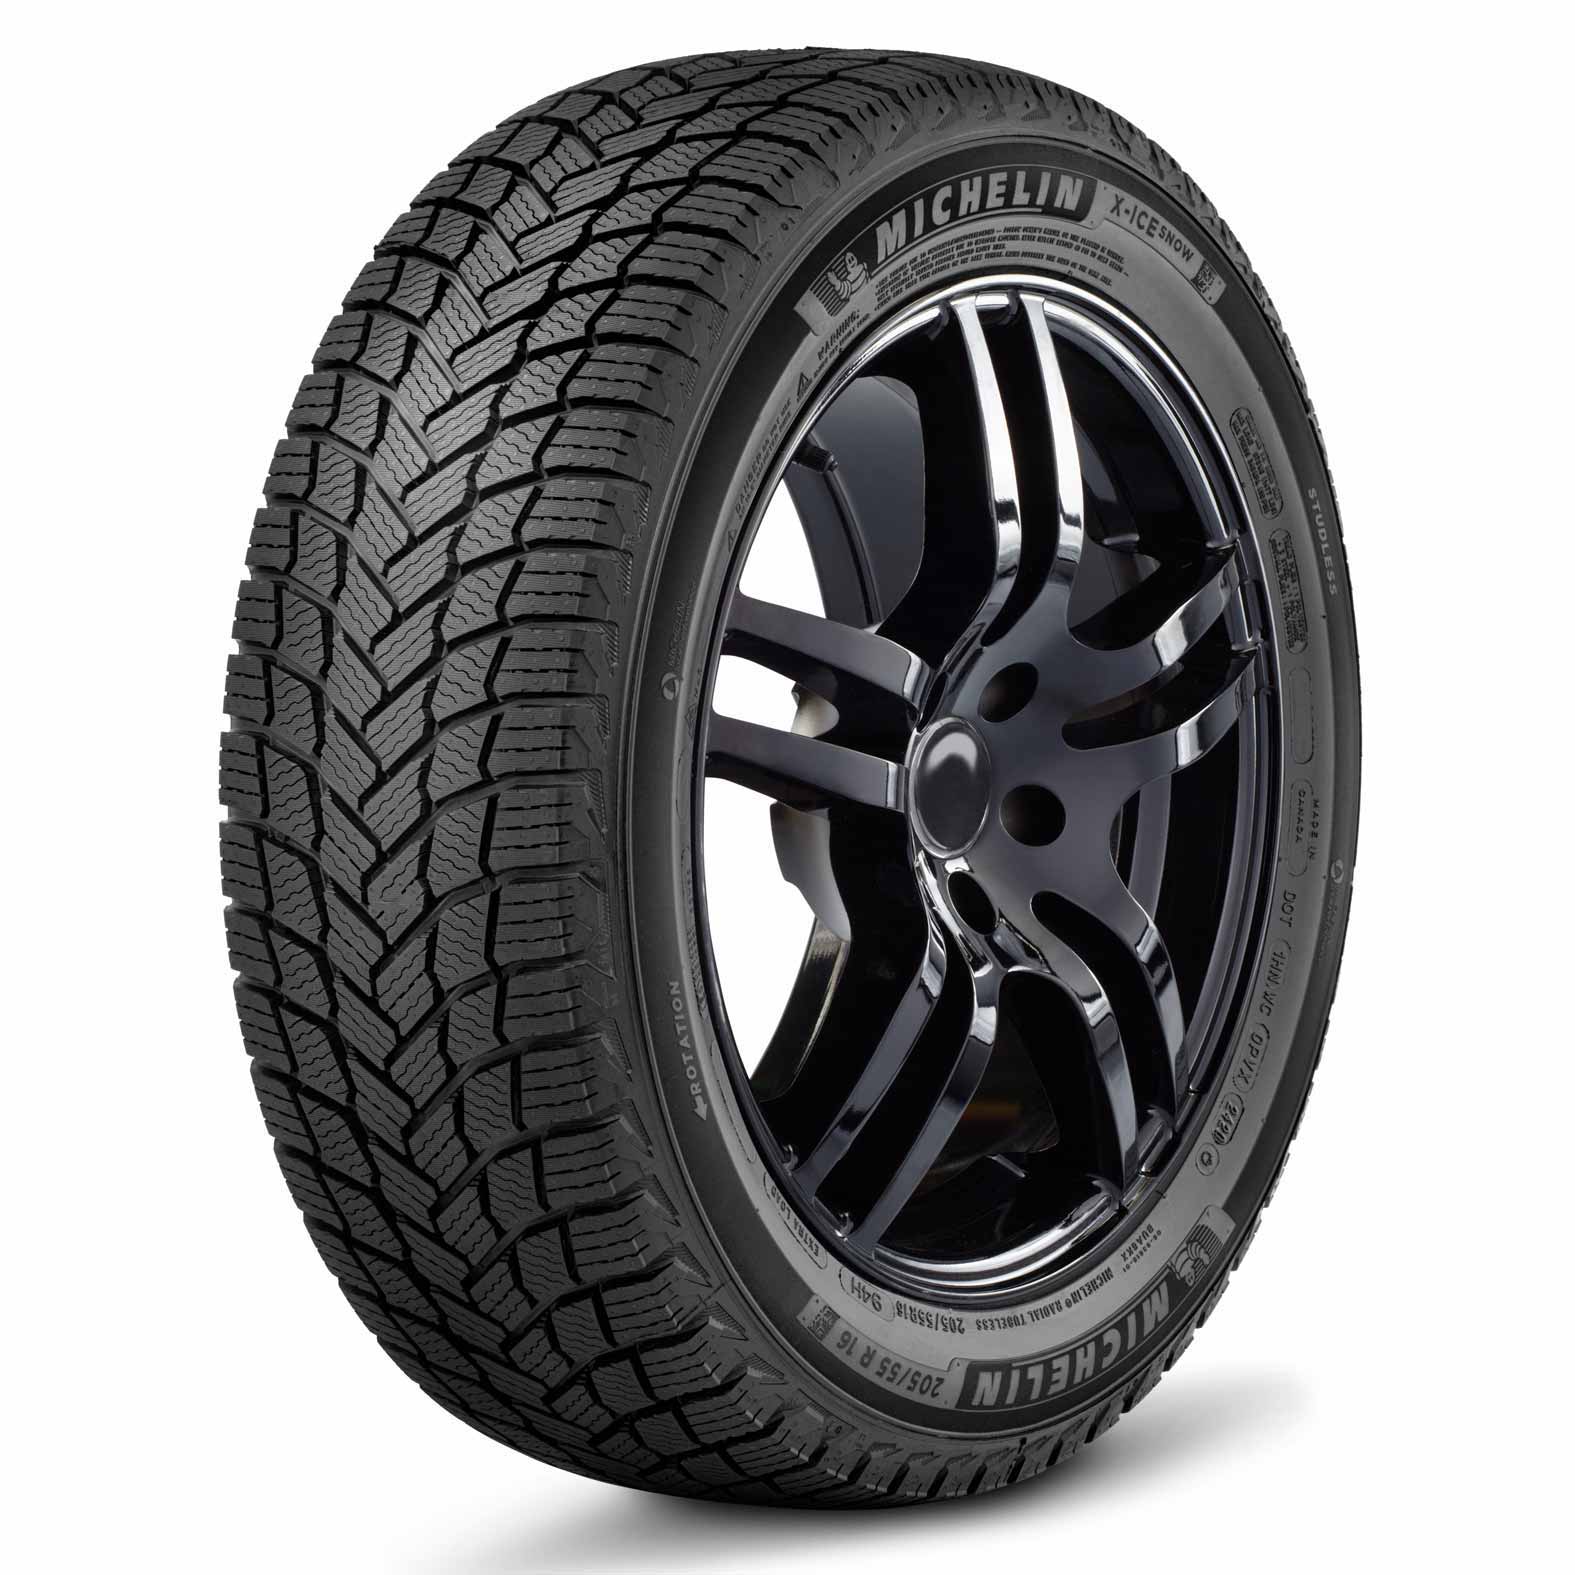 Michelin X-Ice Snow Winter Tire | Tire for Kal